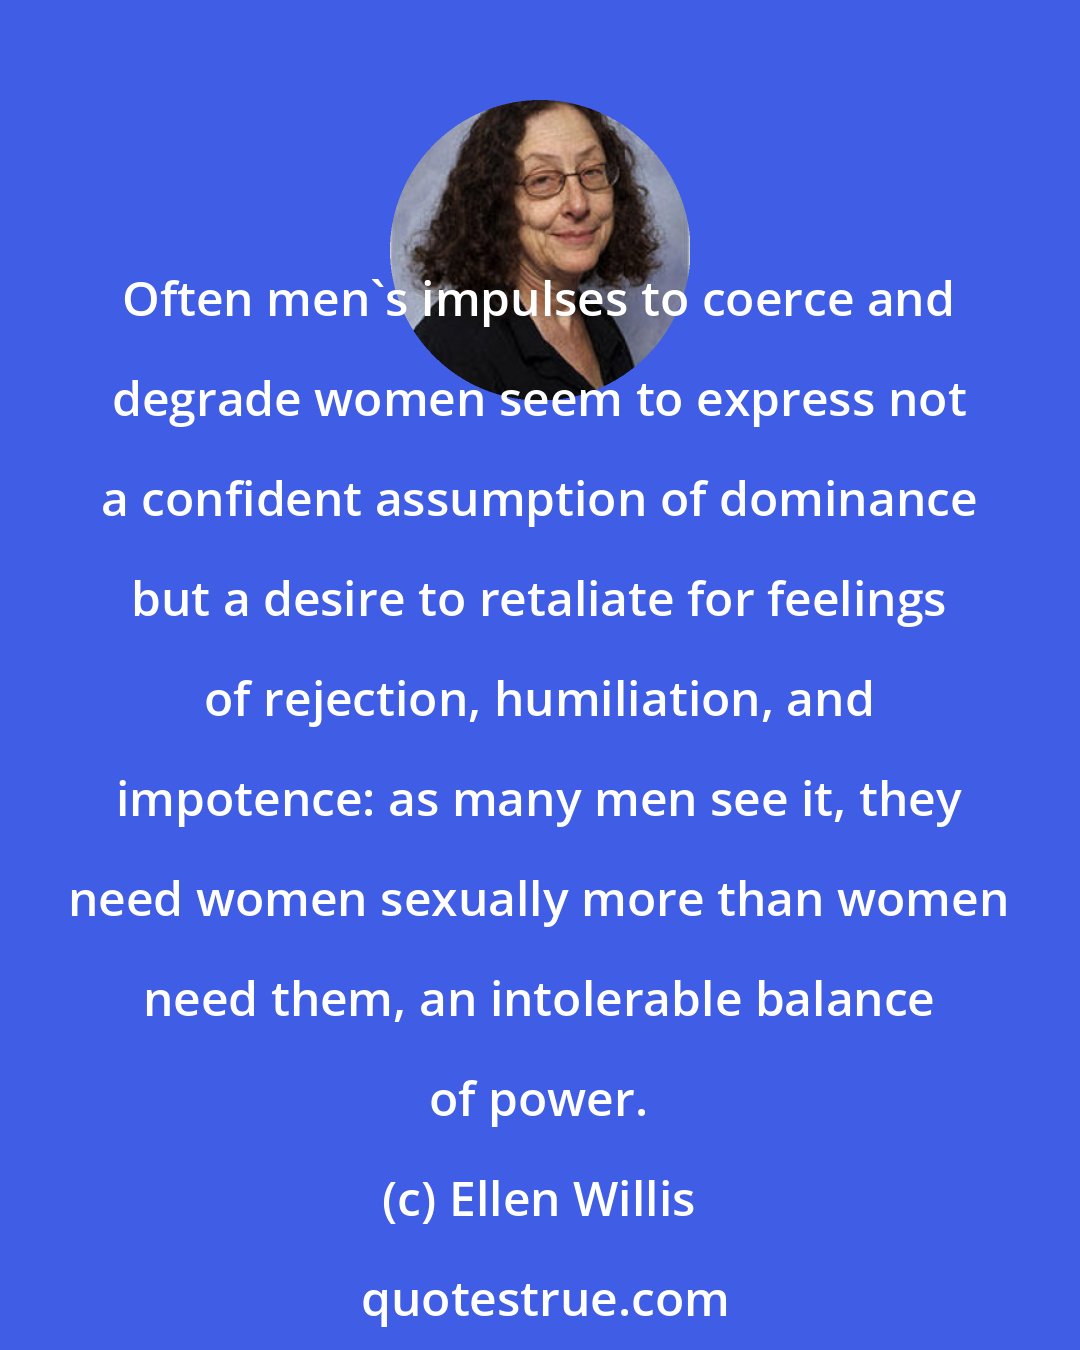 Ellen Willis: Often men's impulses to coerce and degrade women seem to express not a confident assumption of dominance but a desire to retaliate for feelings of rejection, humiliation, and impotence: as many men see it, they need women sexually more than women need them, an intolerable balance of power.